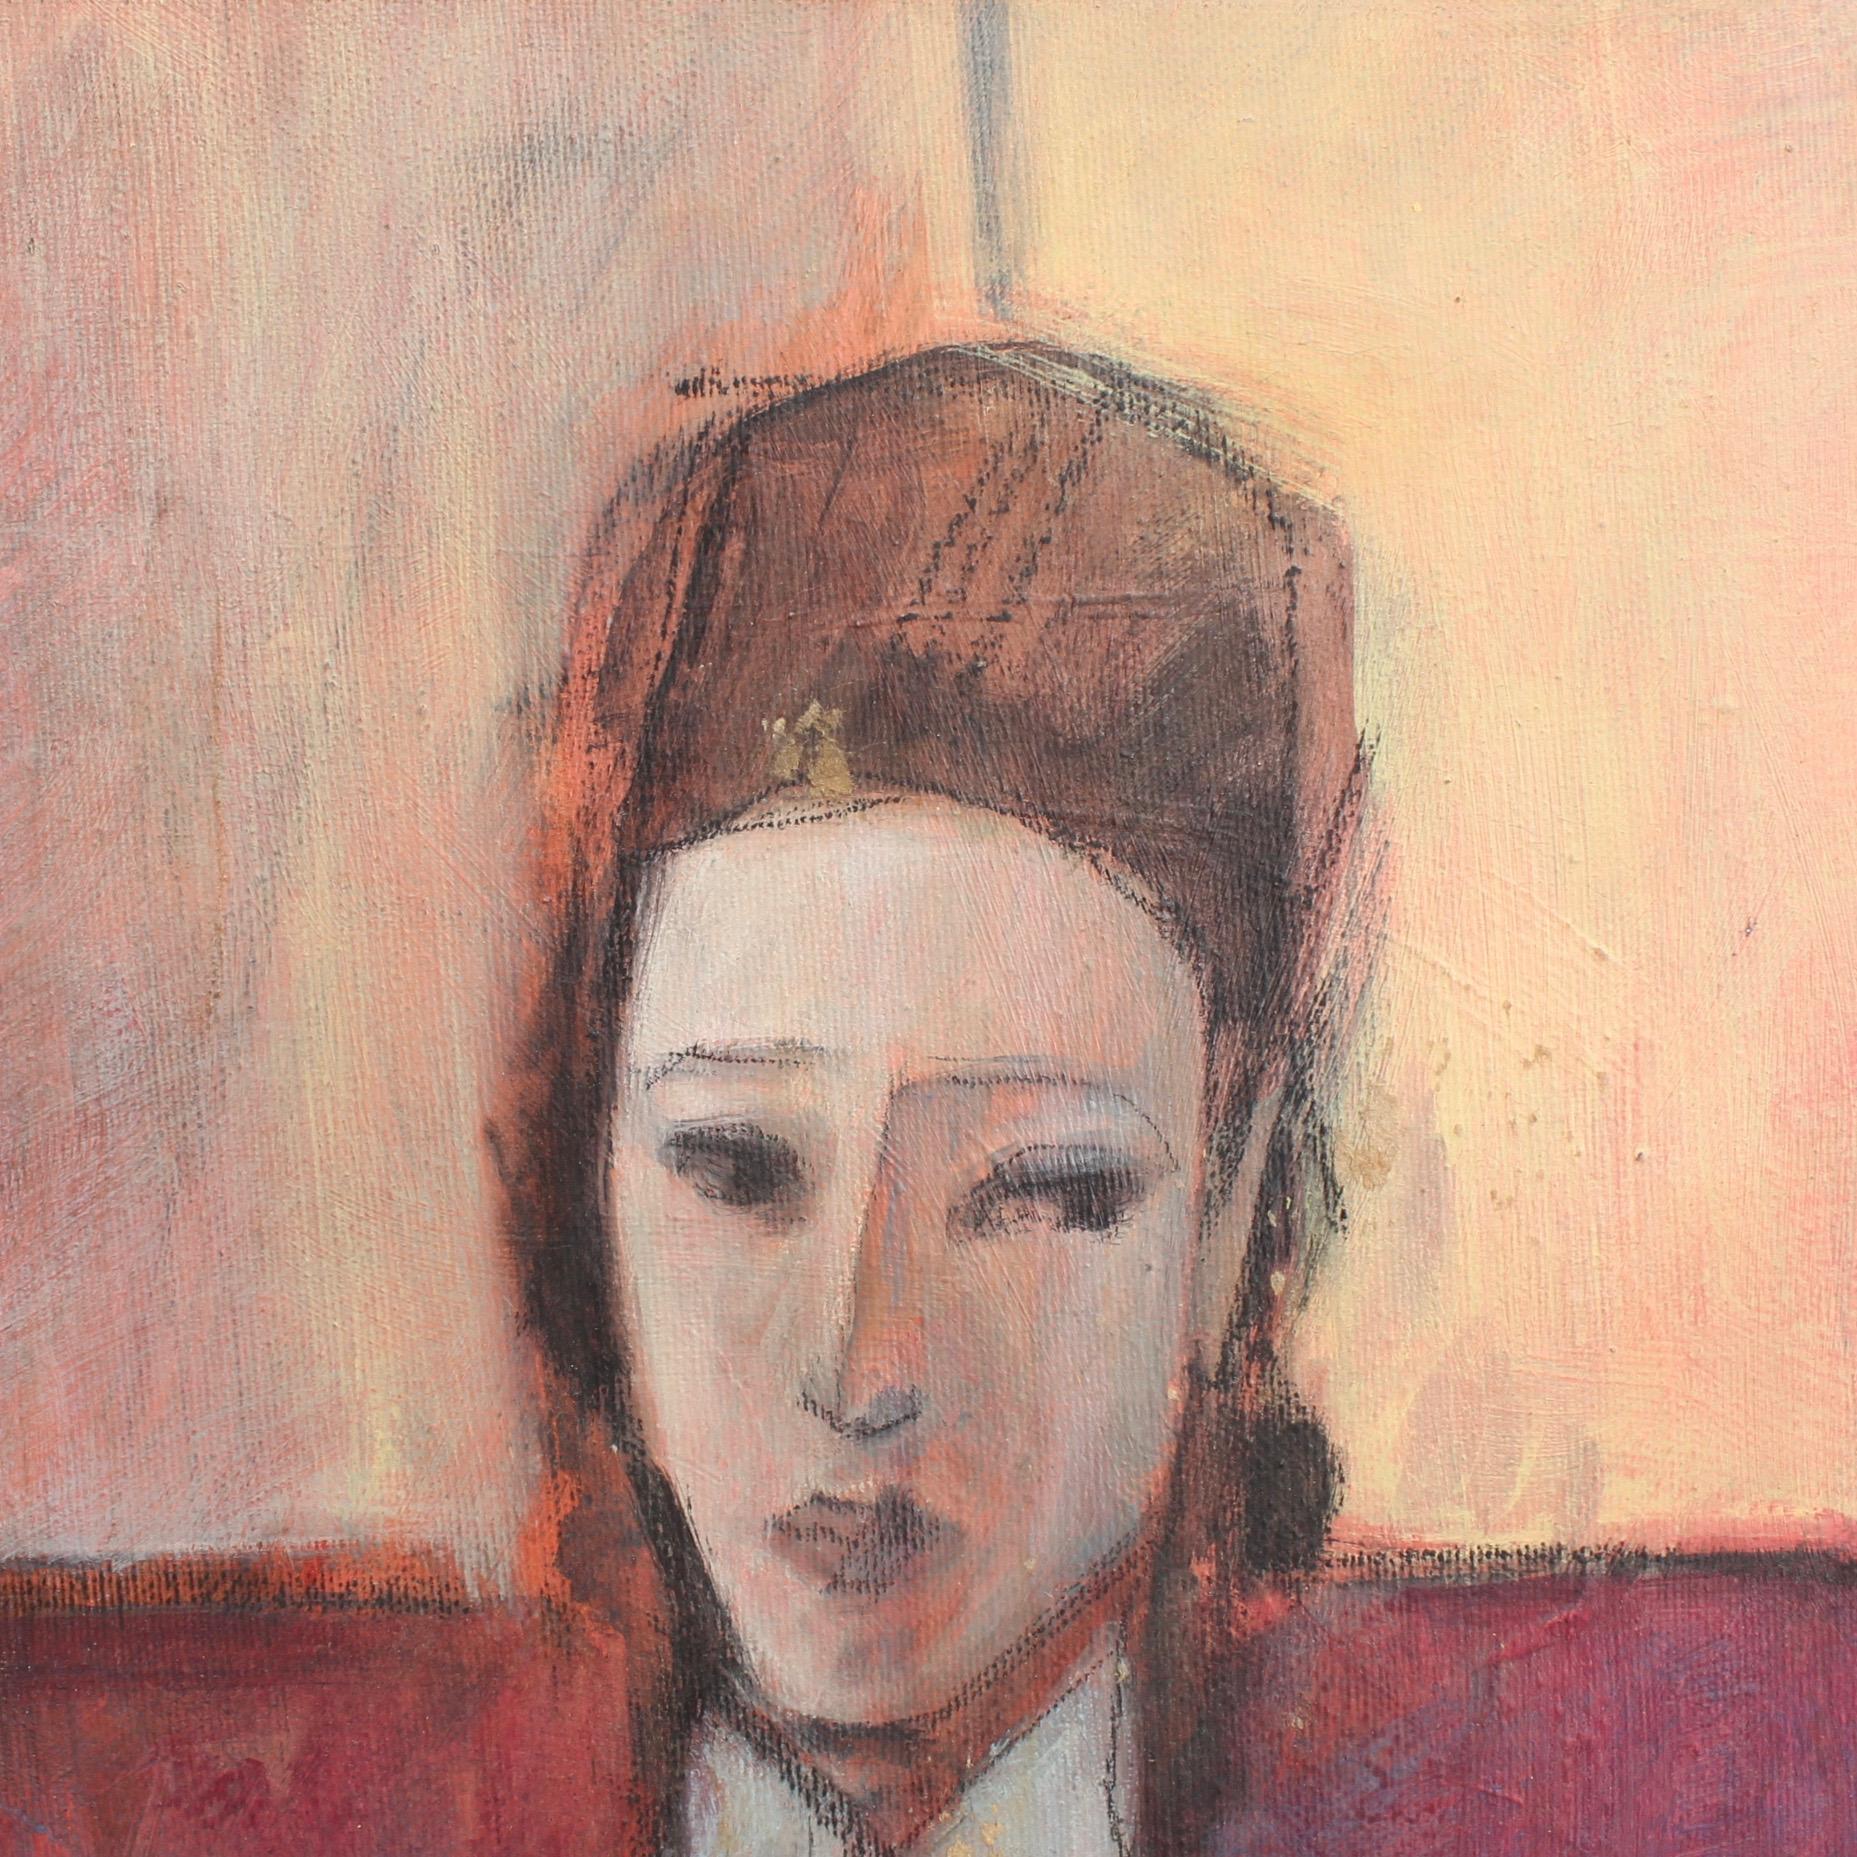 'The Box', mixed-media on canvas by Italian artist by the name of Vanzi, (circa 1960s). Discovered in the Tuscan region of Italy, this intriguing painting of a very stylishly dressed young woman holding a box makes one pause for understanding. Her